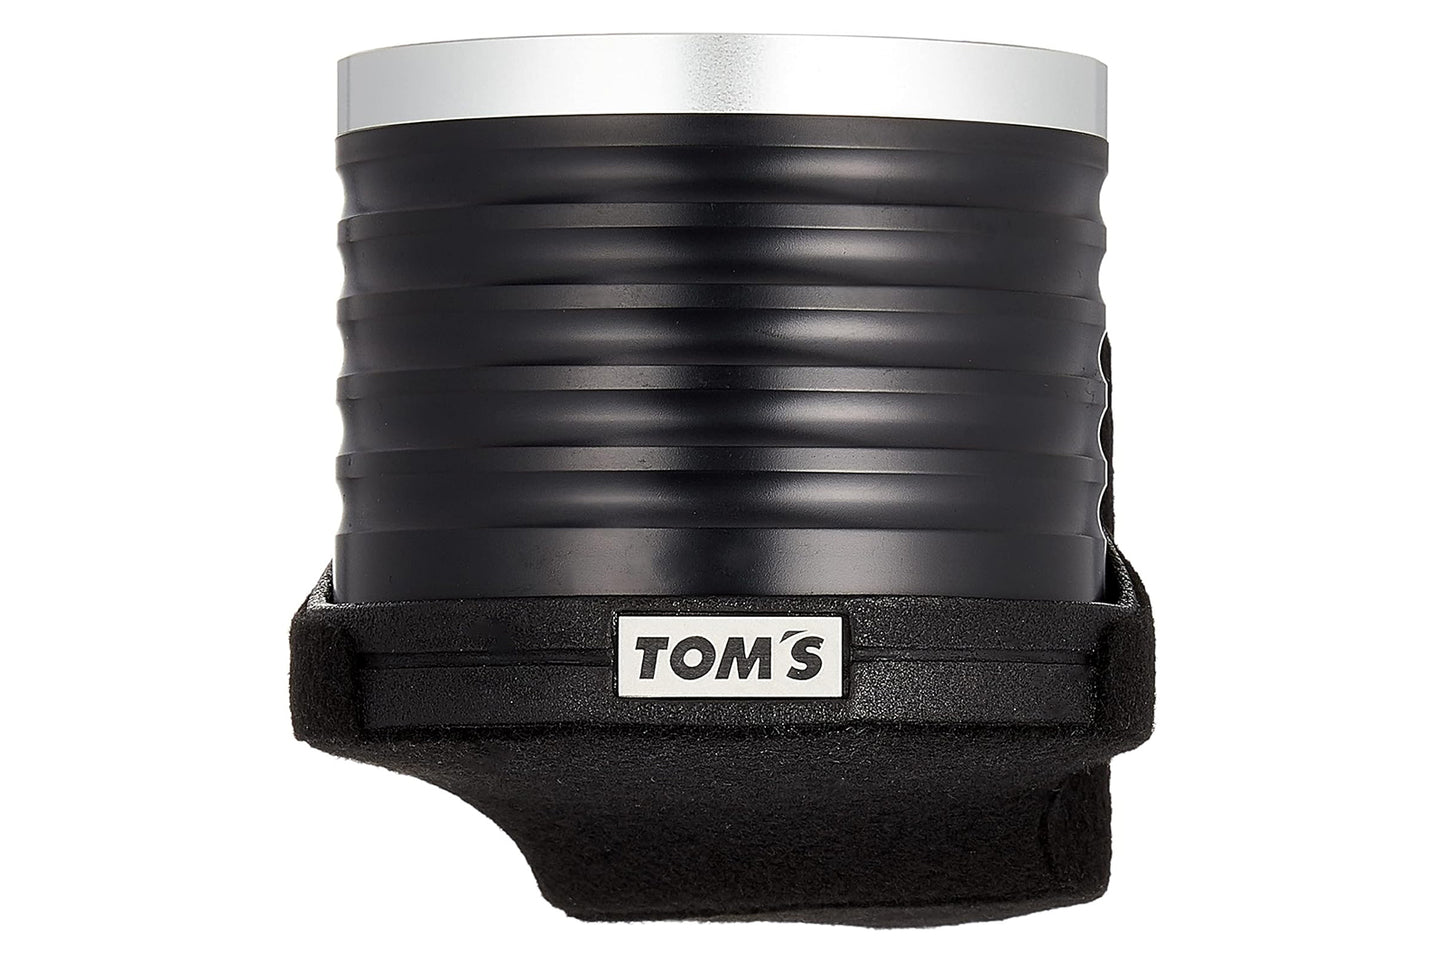 Toms Racing Cuper holder for GT86/BRZ ZN6